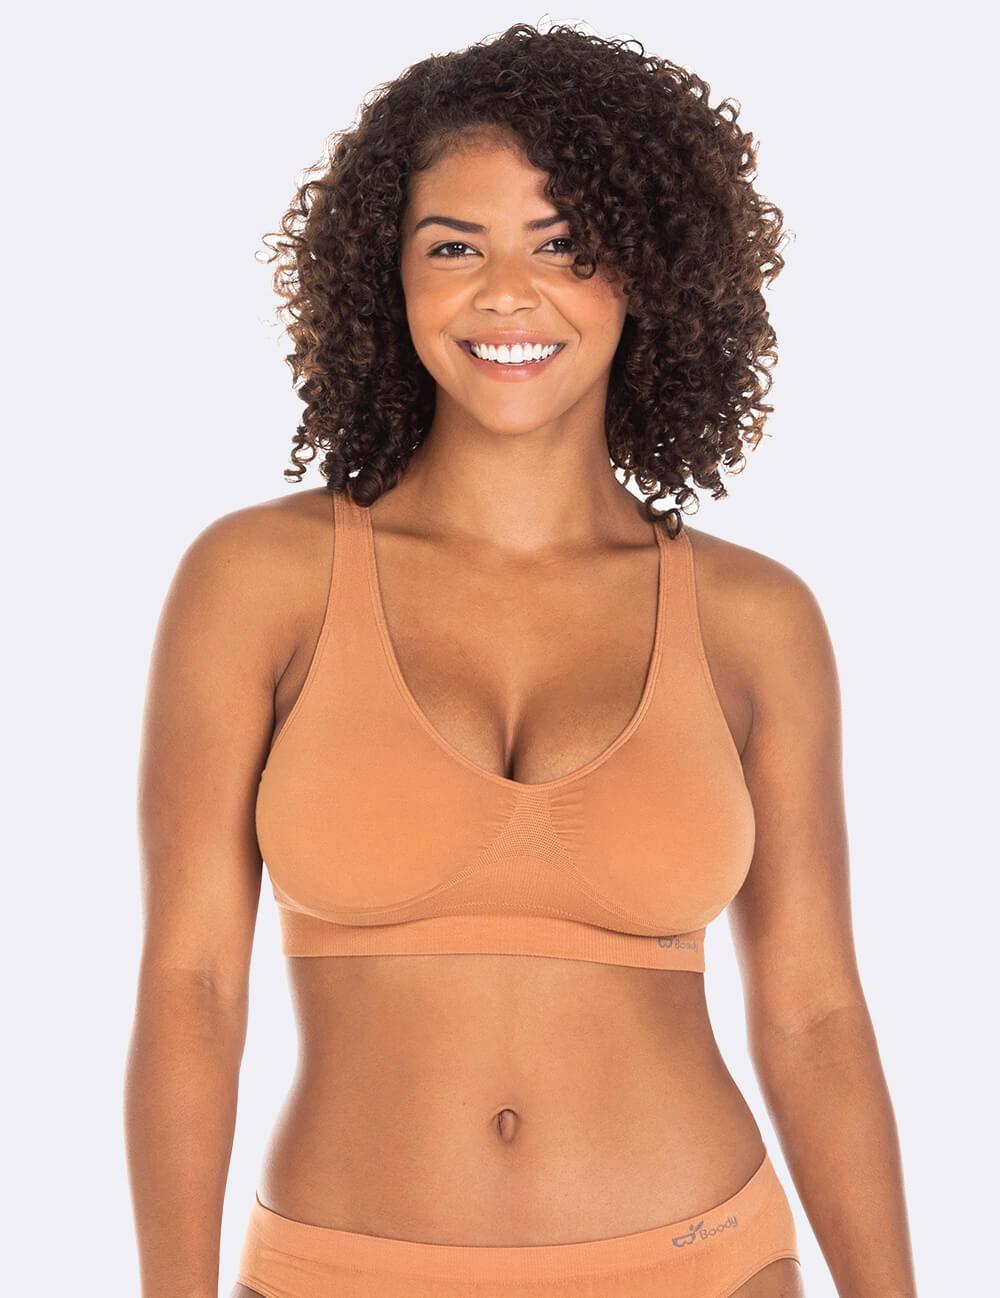 Boody Ecowear for Women's Padded Shaper Bra - Removable Padding